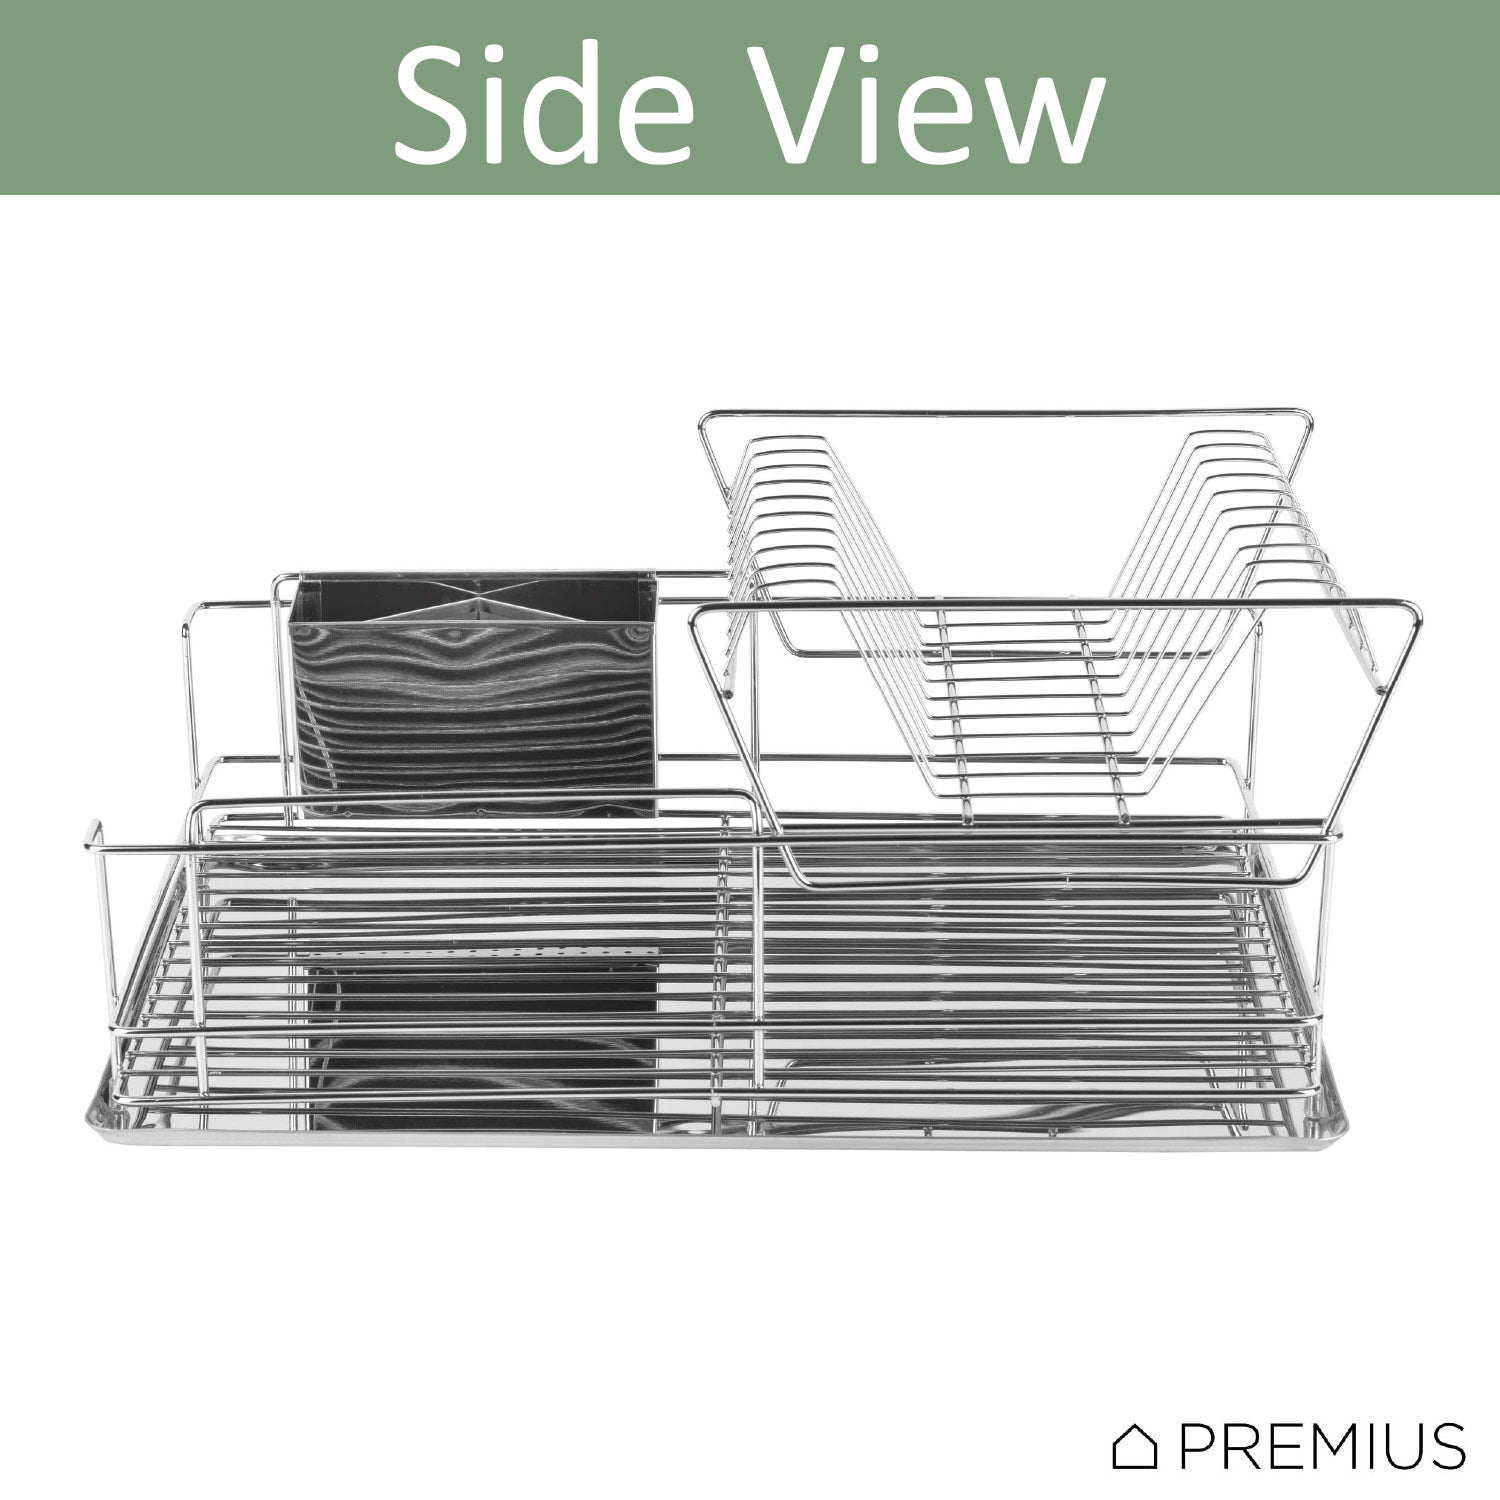 Premius 2 Tier Chrome Finished Dish Rack, Silver, 18.5x13x9 Inches